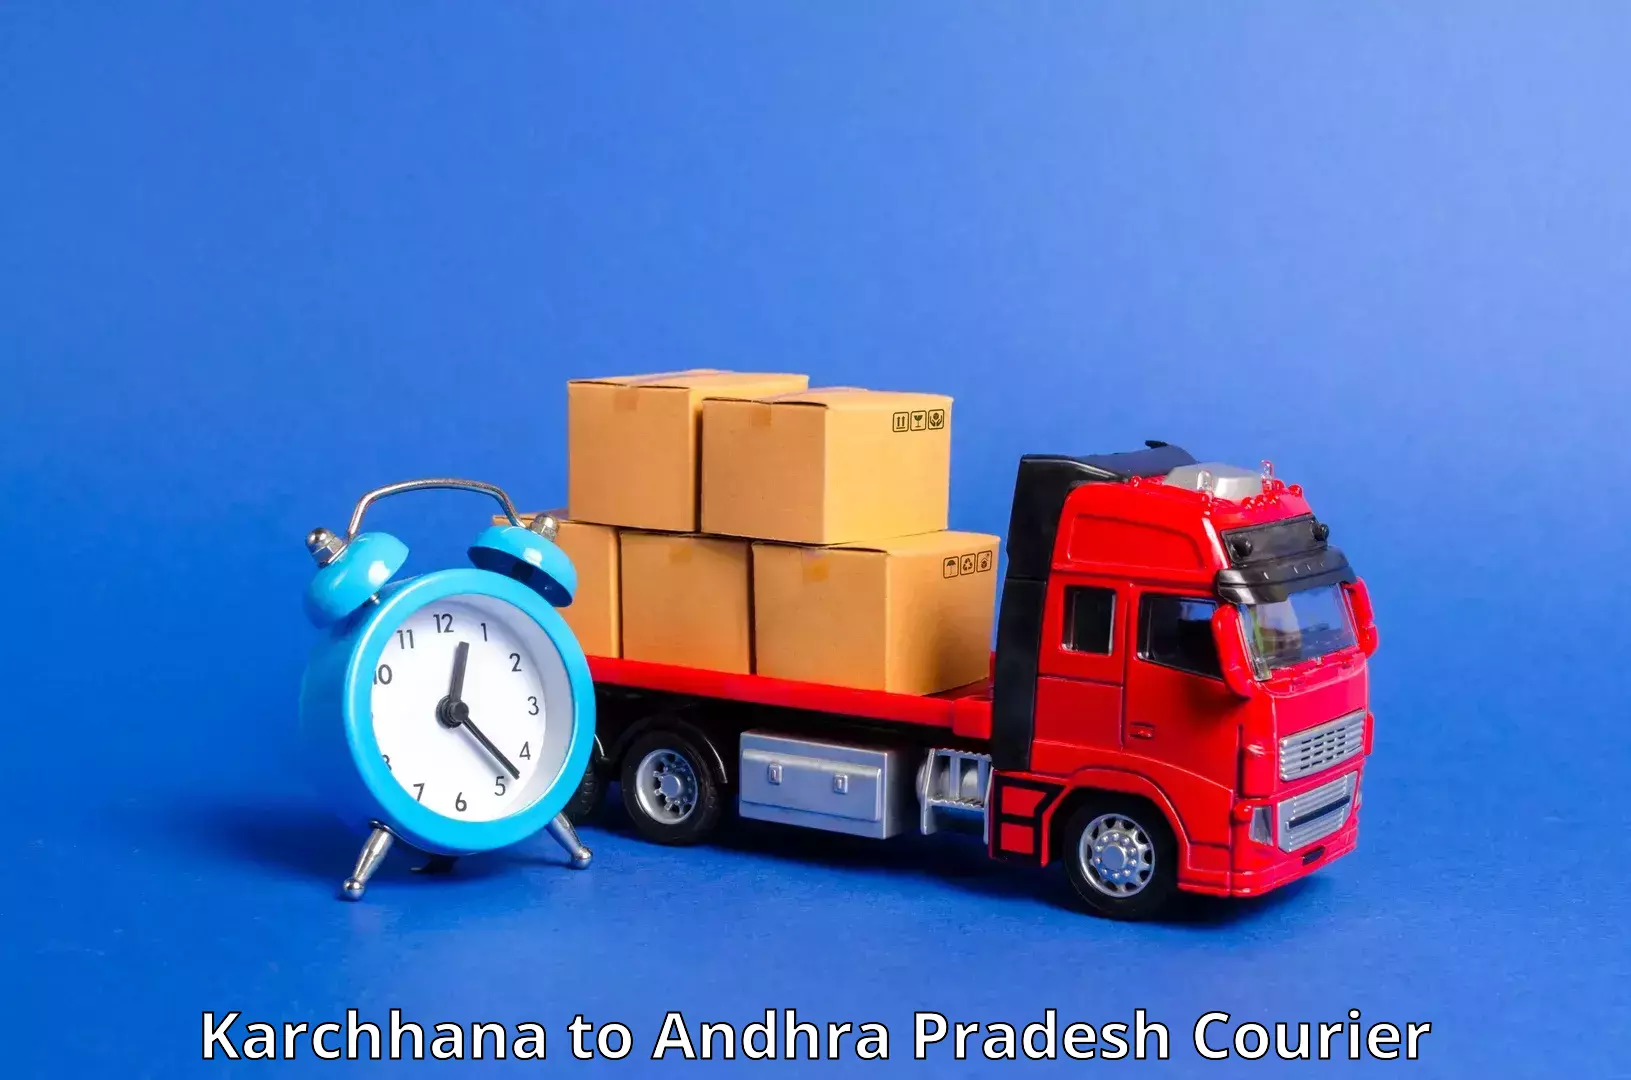 Express package services in Karchhana to Gudivada